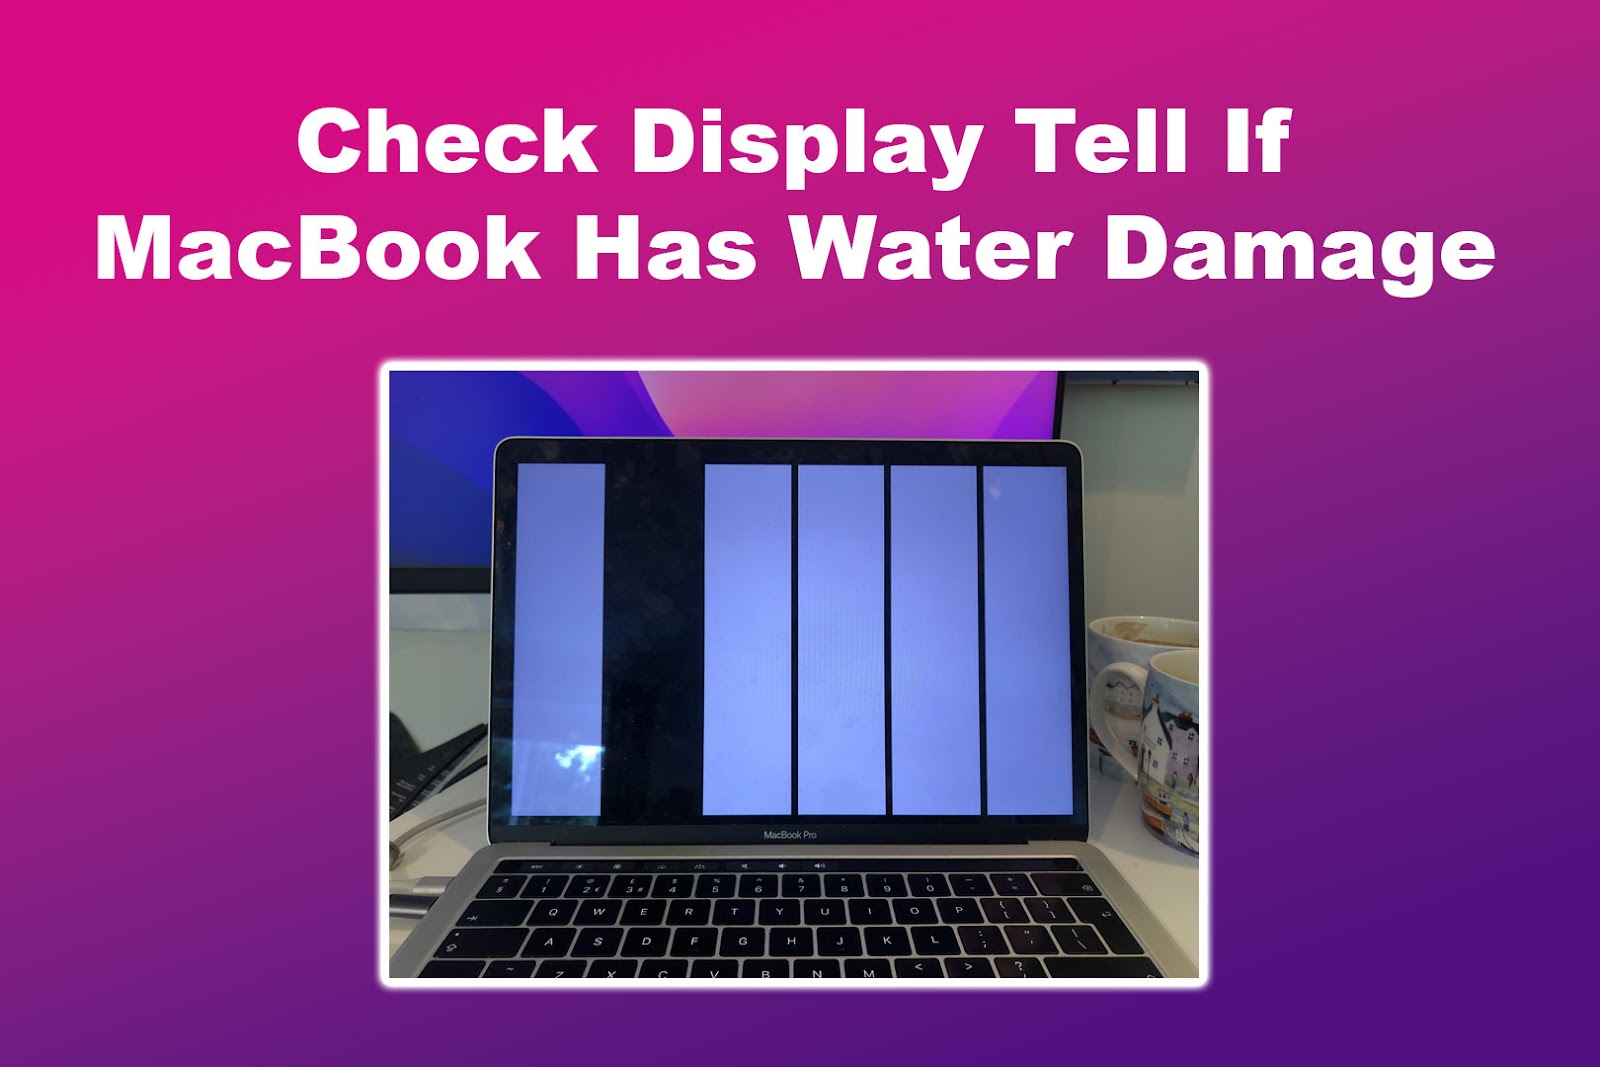 Check Display Tell If MacBook Has Water Damage